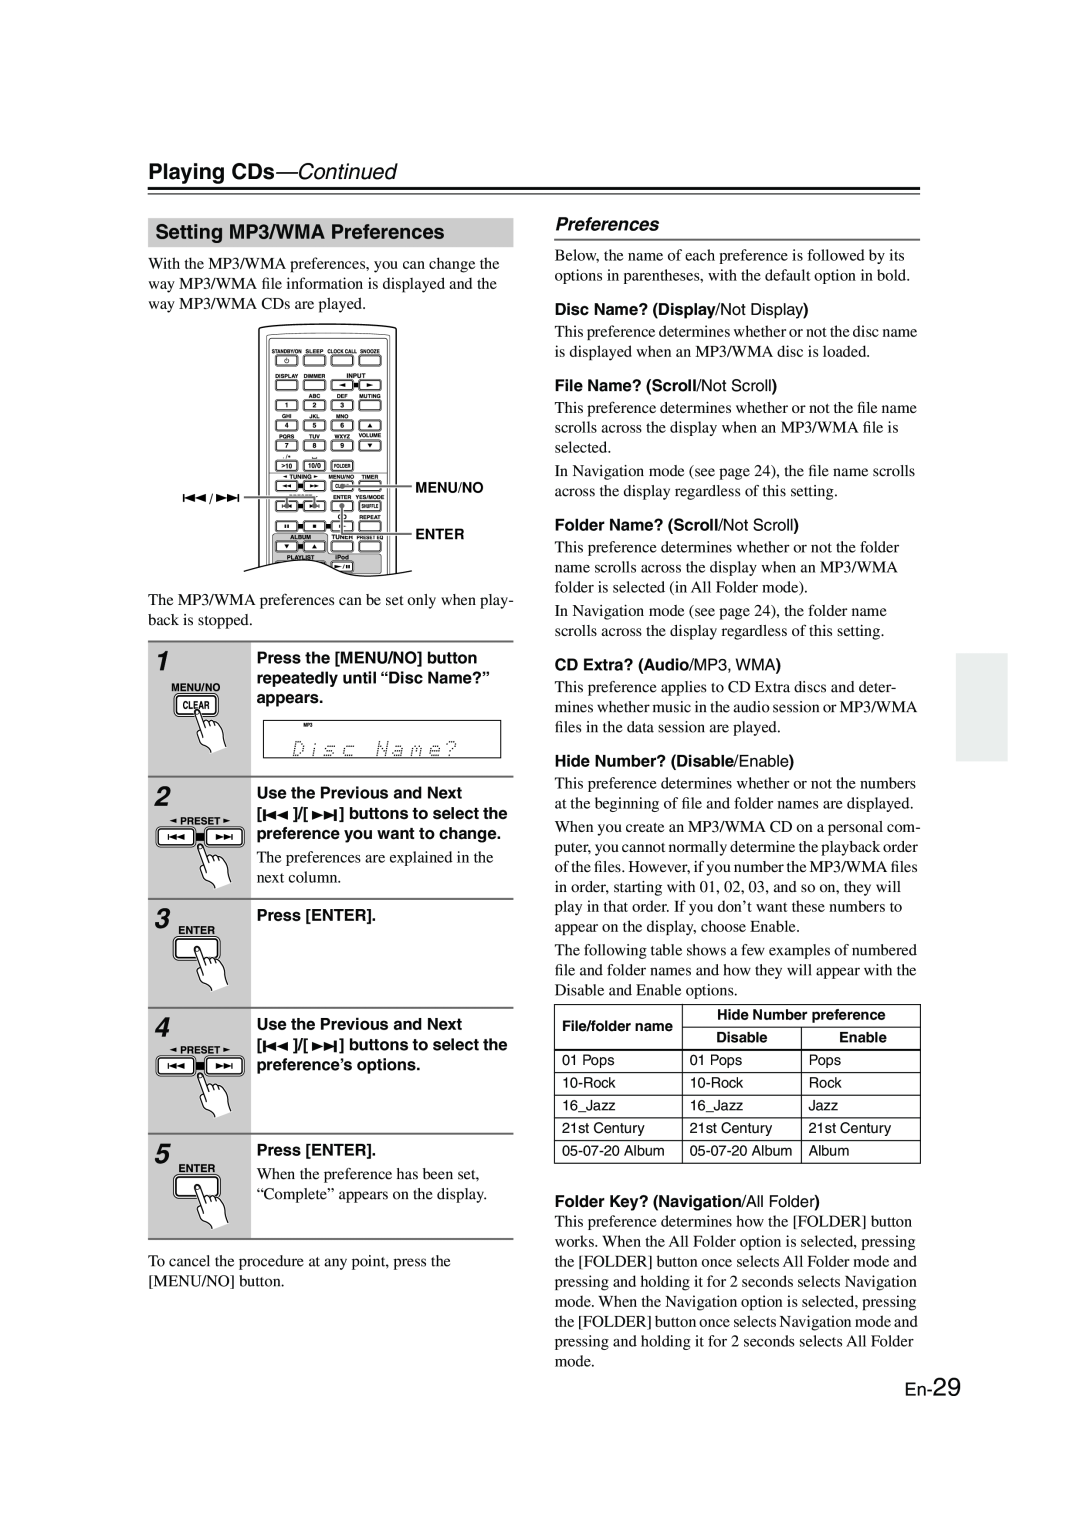 Onkyo CBX-300 instruction manual Setting MP3/WMA Preferences, En-29, Playing CDs—Continued 